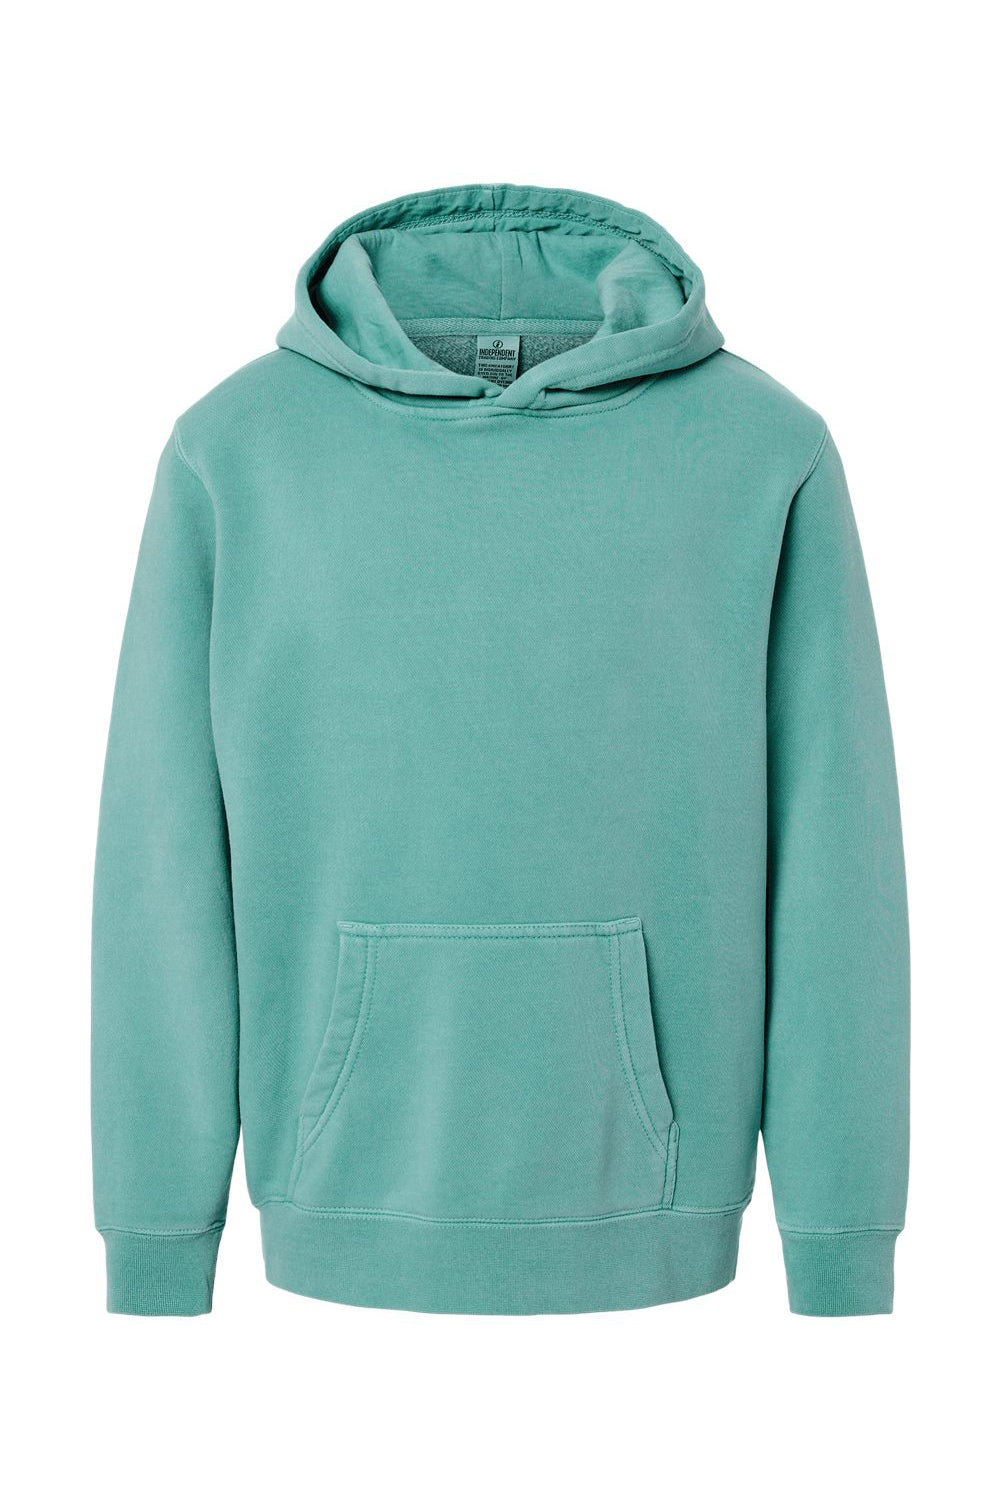 Independent Trading Co. PRM1500Y Youth Pigment Dyed Hooded Sweatshirt Hoodie Mint Green Flat Front